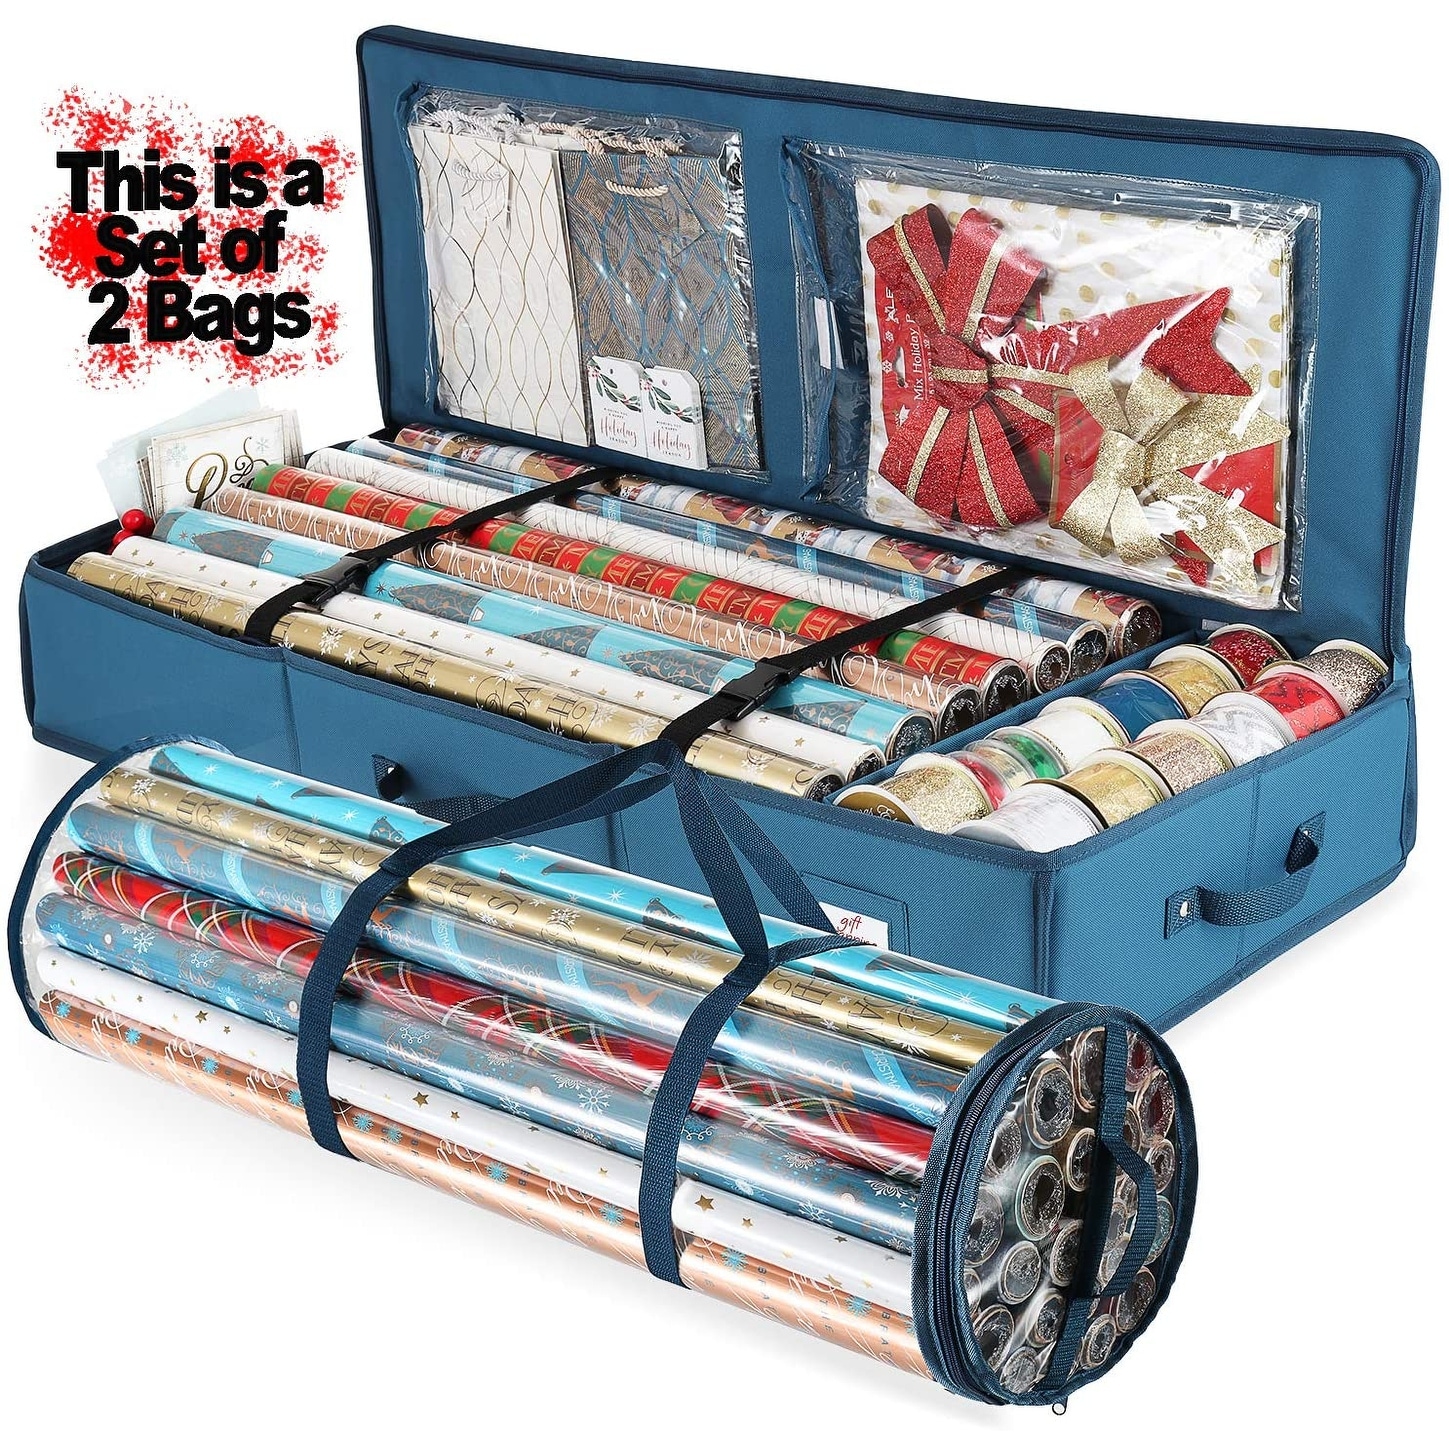 Hearth & Harbor Christmas Wrapping Paper Storage Organizer Container - Under-Bed Storage Box for Holiday Storage & Accessories